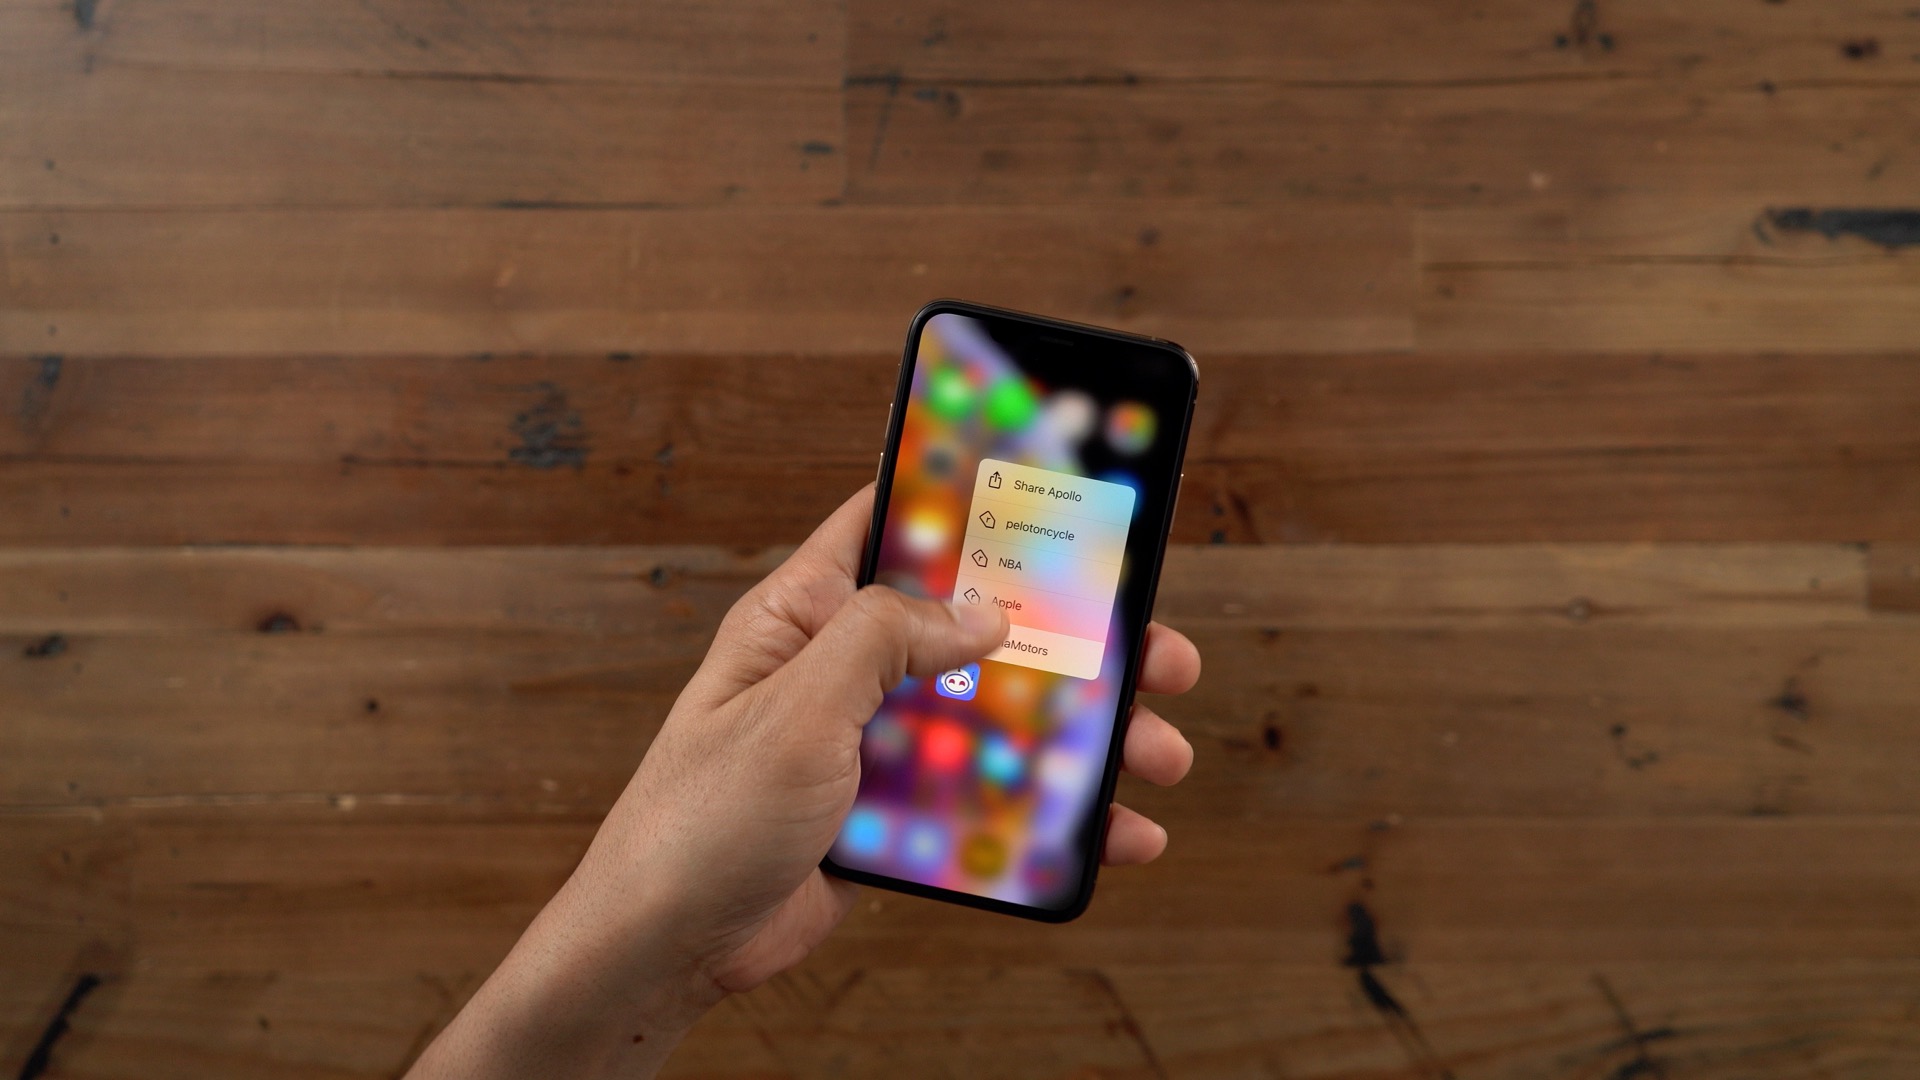 Do all phones have 3D Touch?